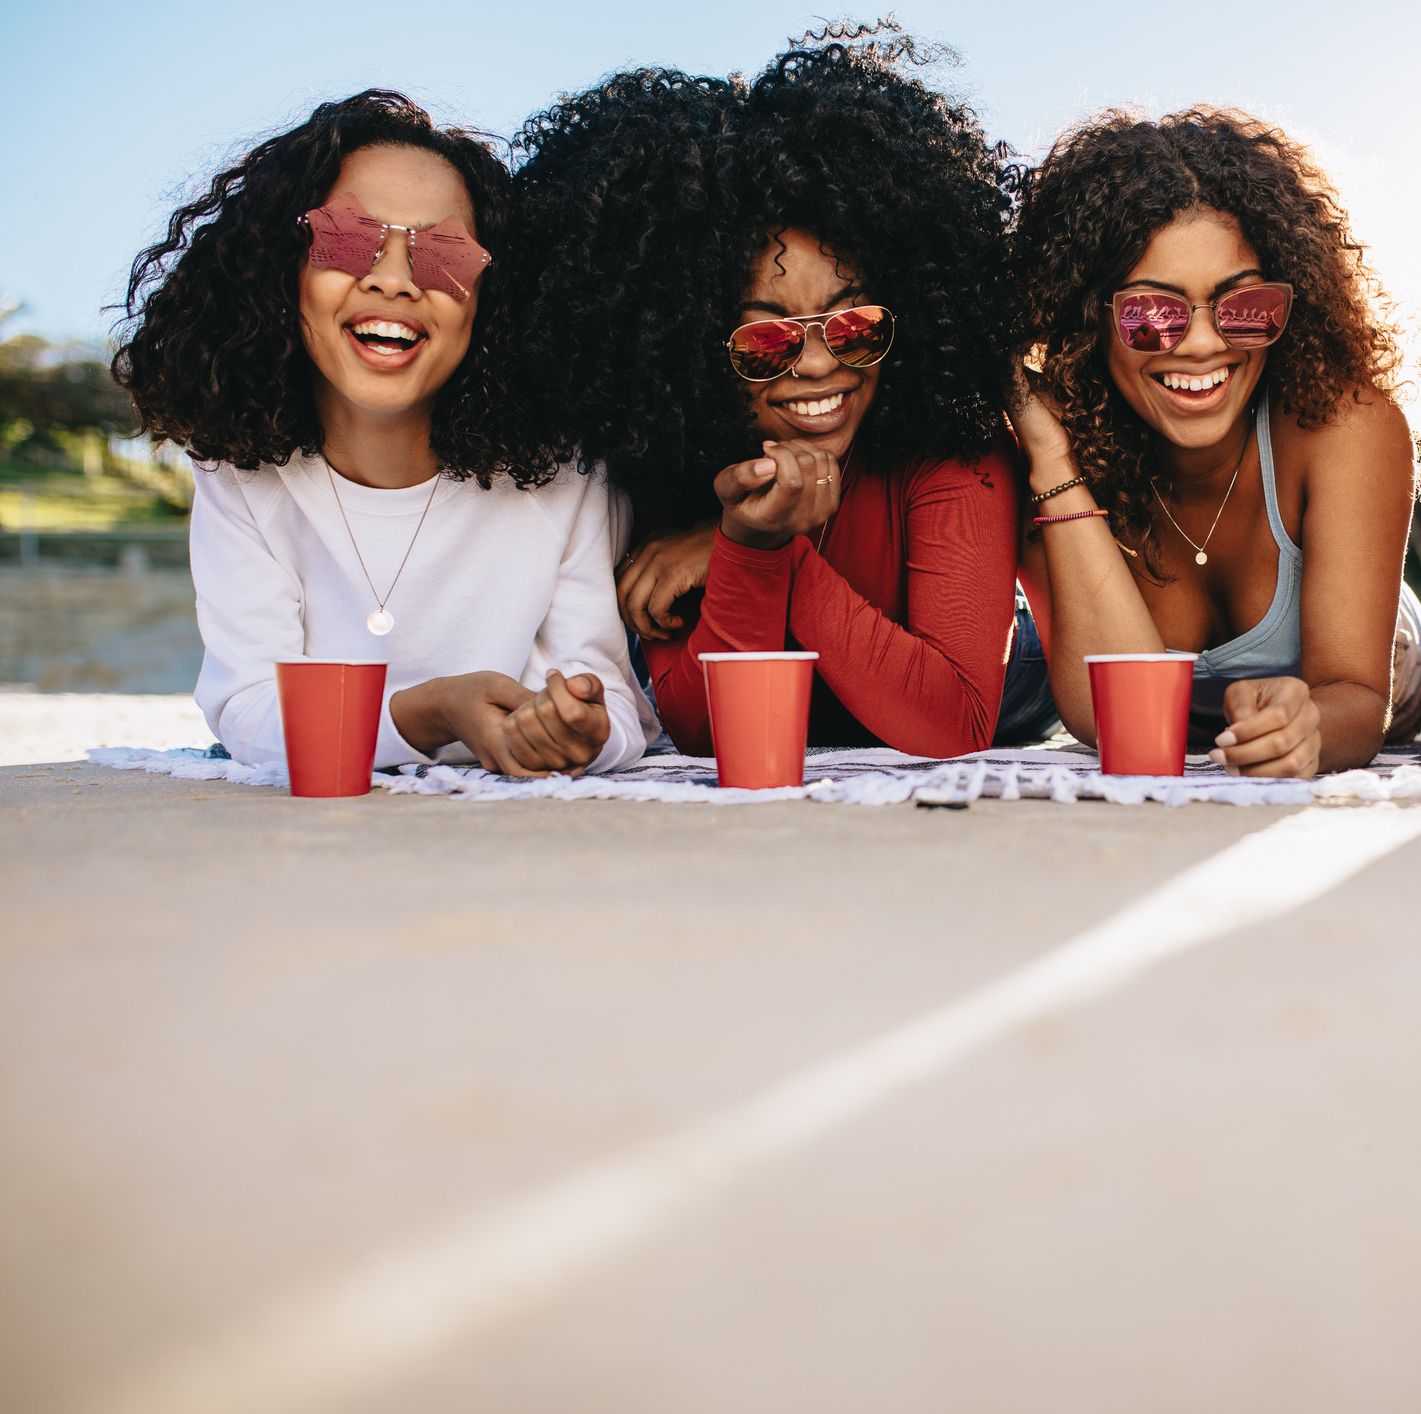 25 Affordable Girls' Trip Ideas That Will Convince You to Finally Plan That Getaway